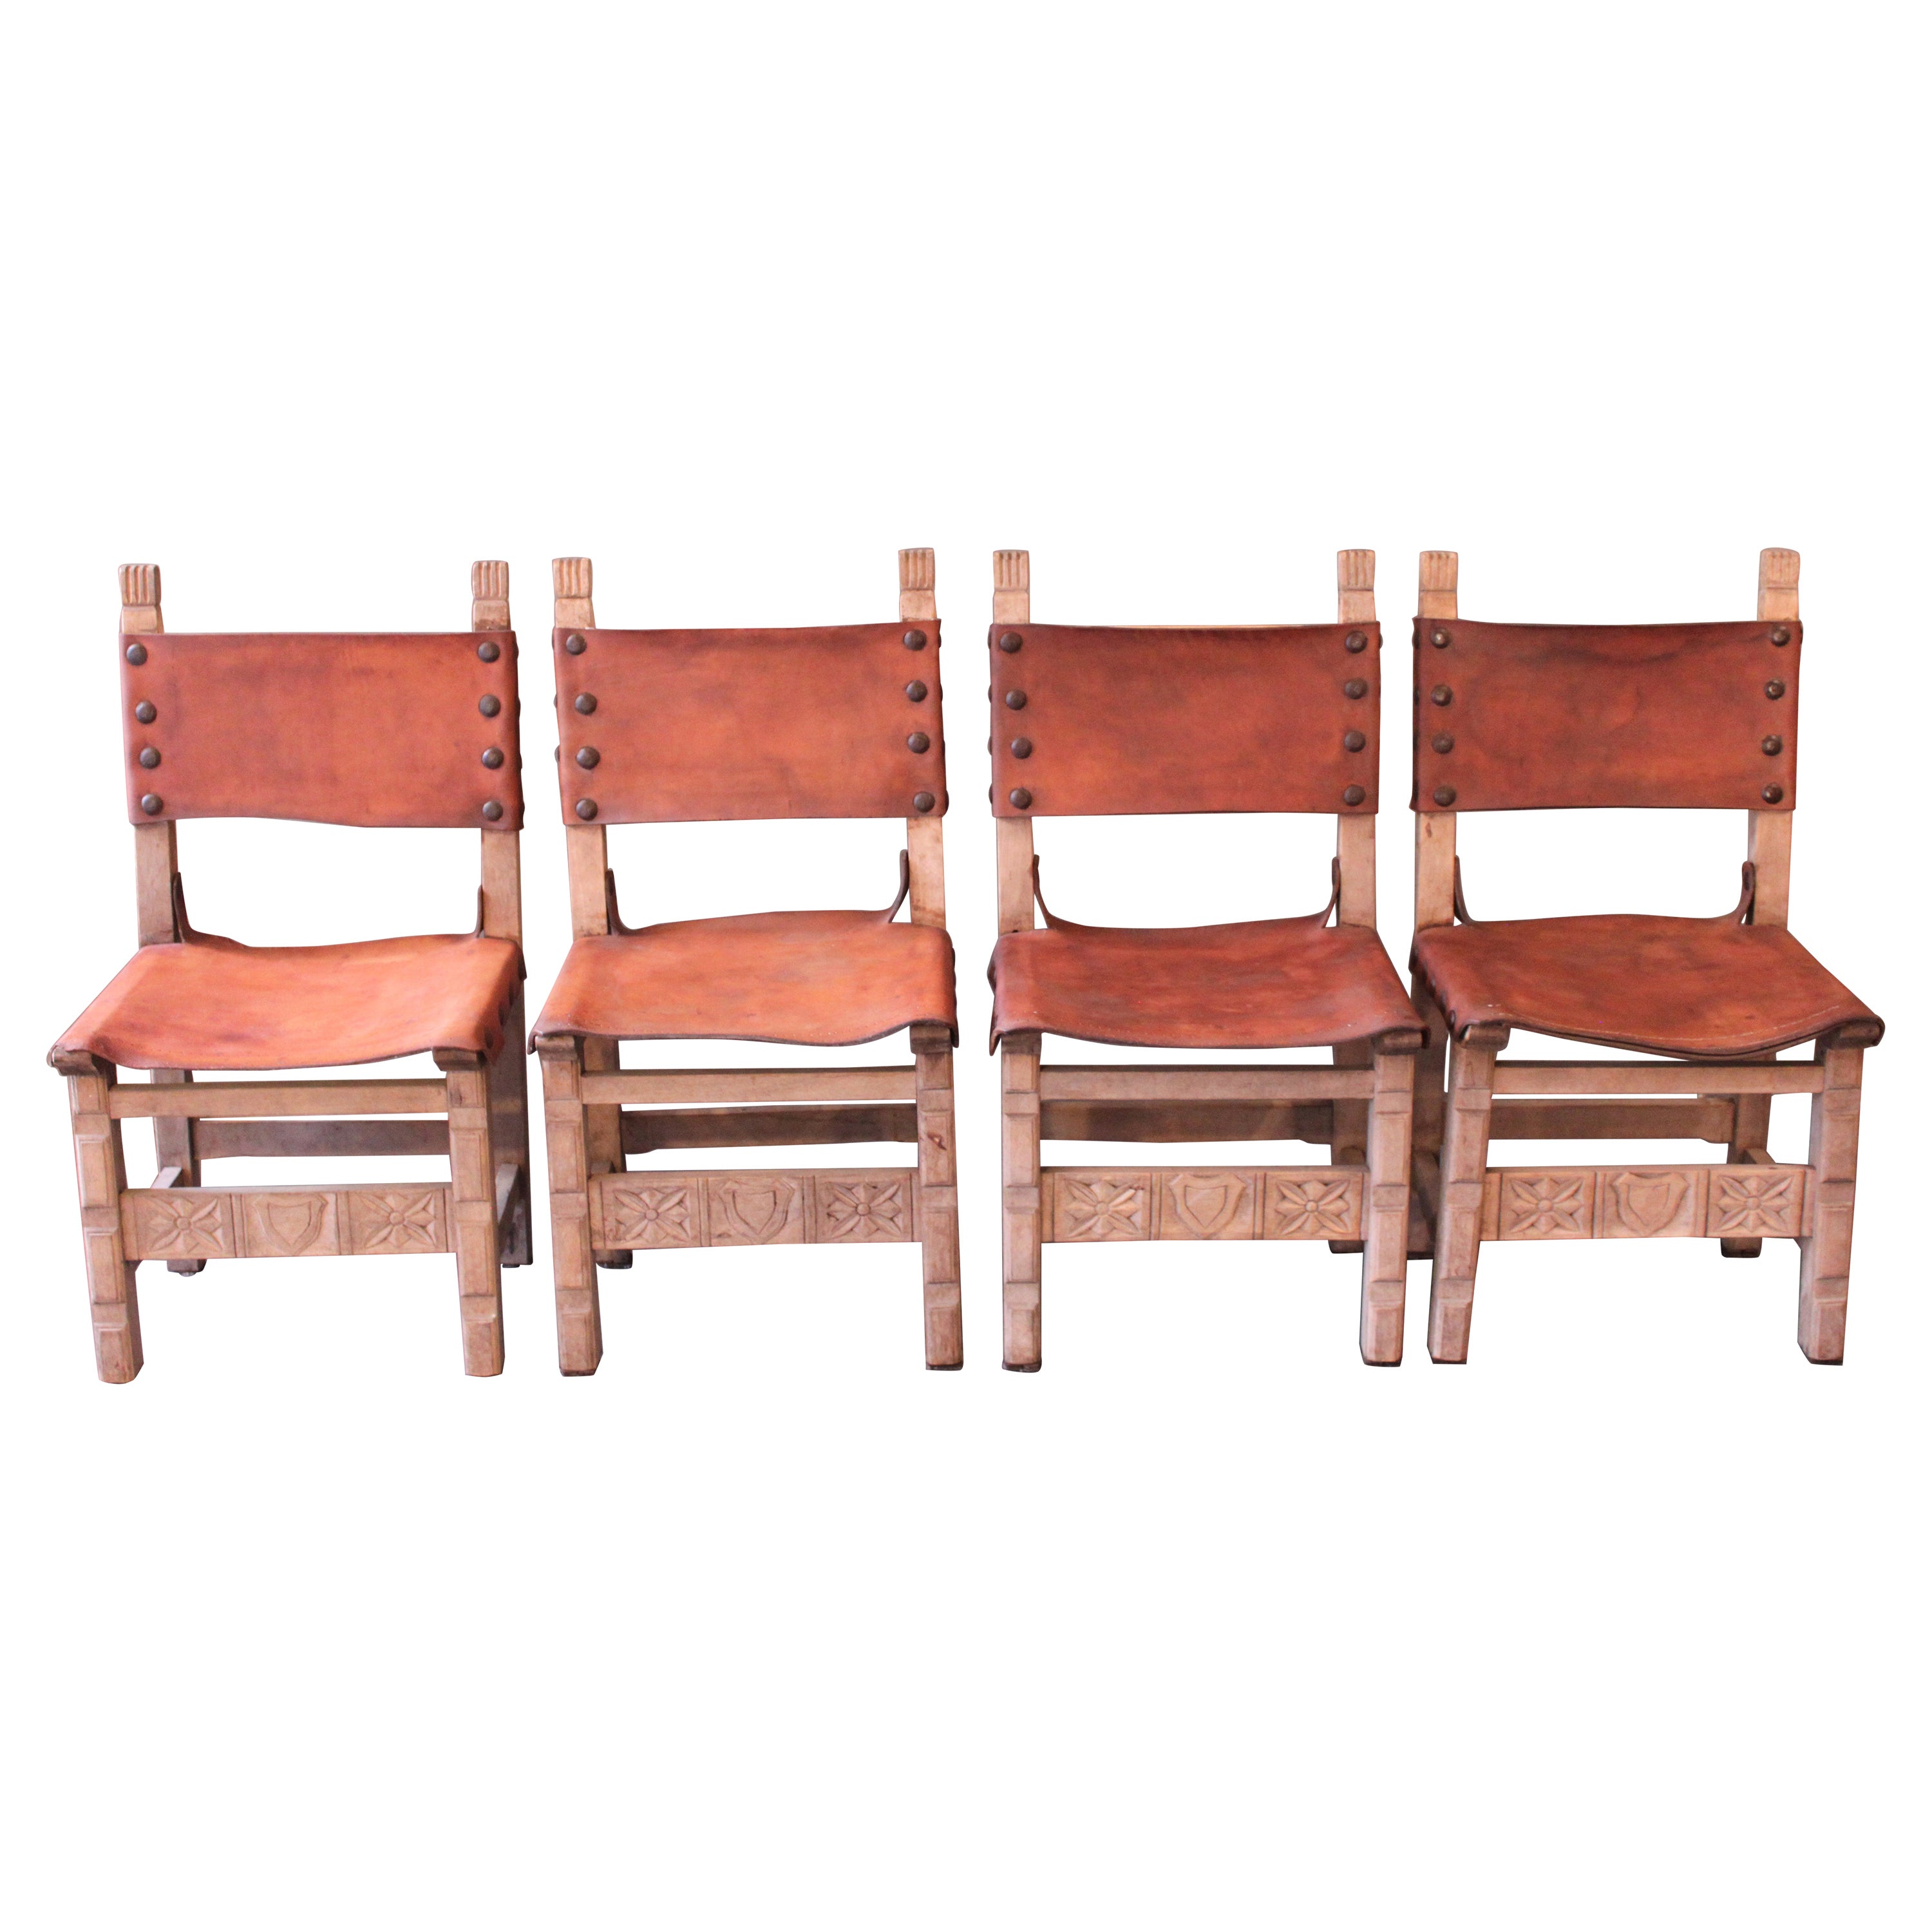 German Castle Chairs ca. 1900 For Sale